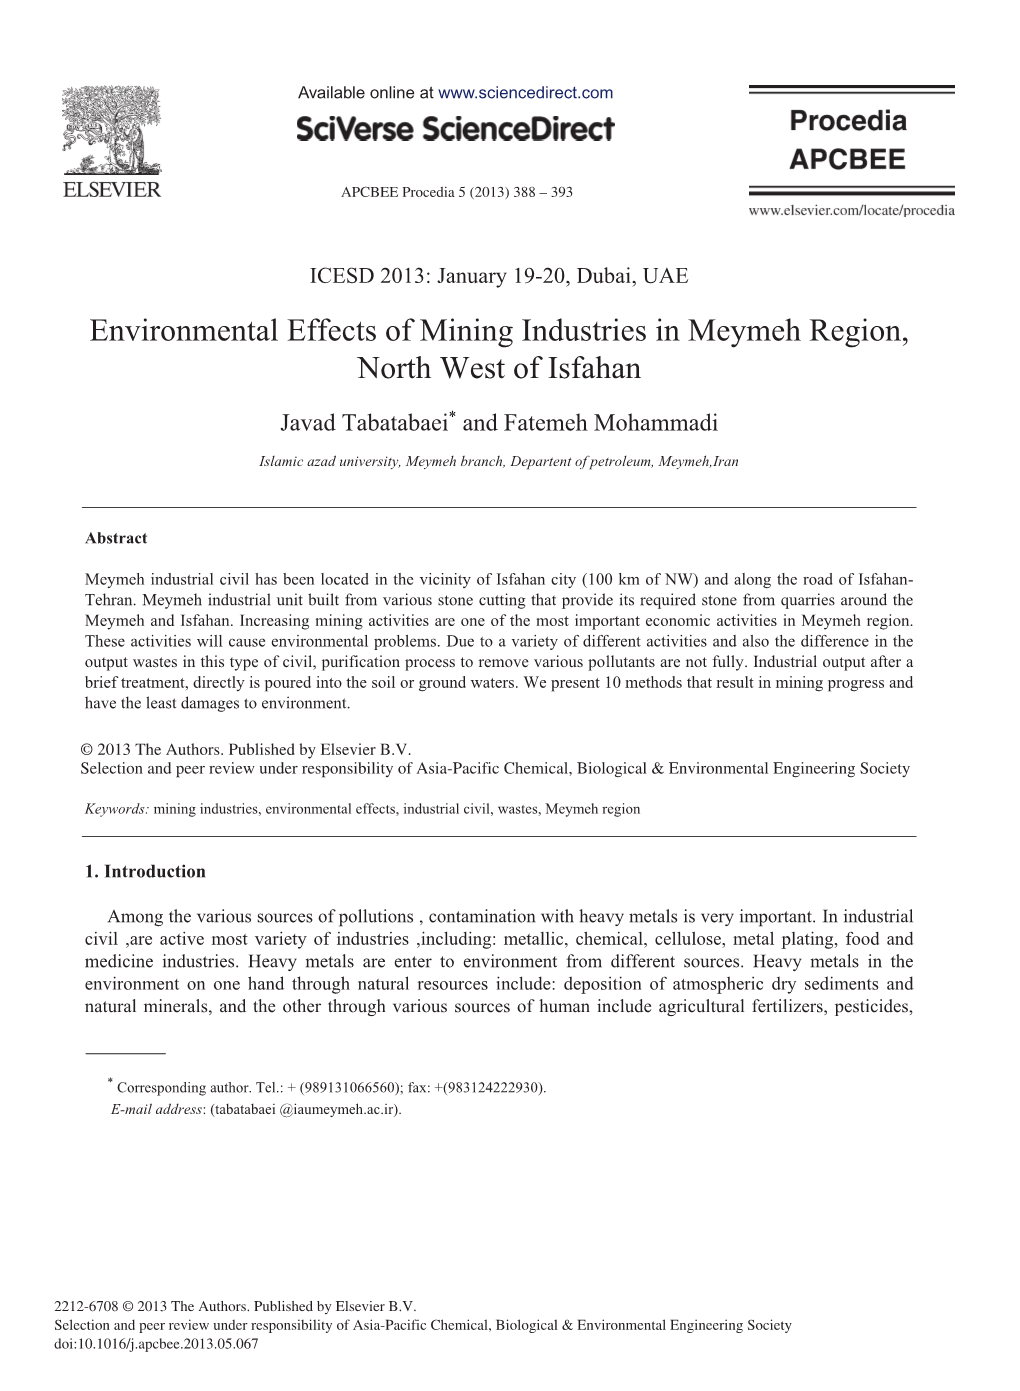 Environmental Effects of Mining Industries in Meymeh Region, North West of Isfahan